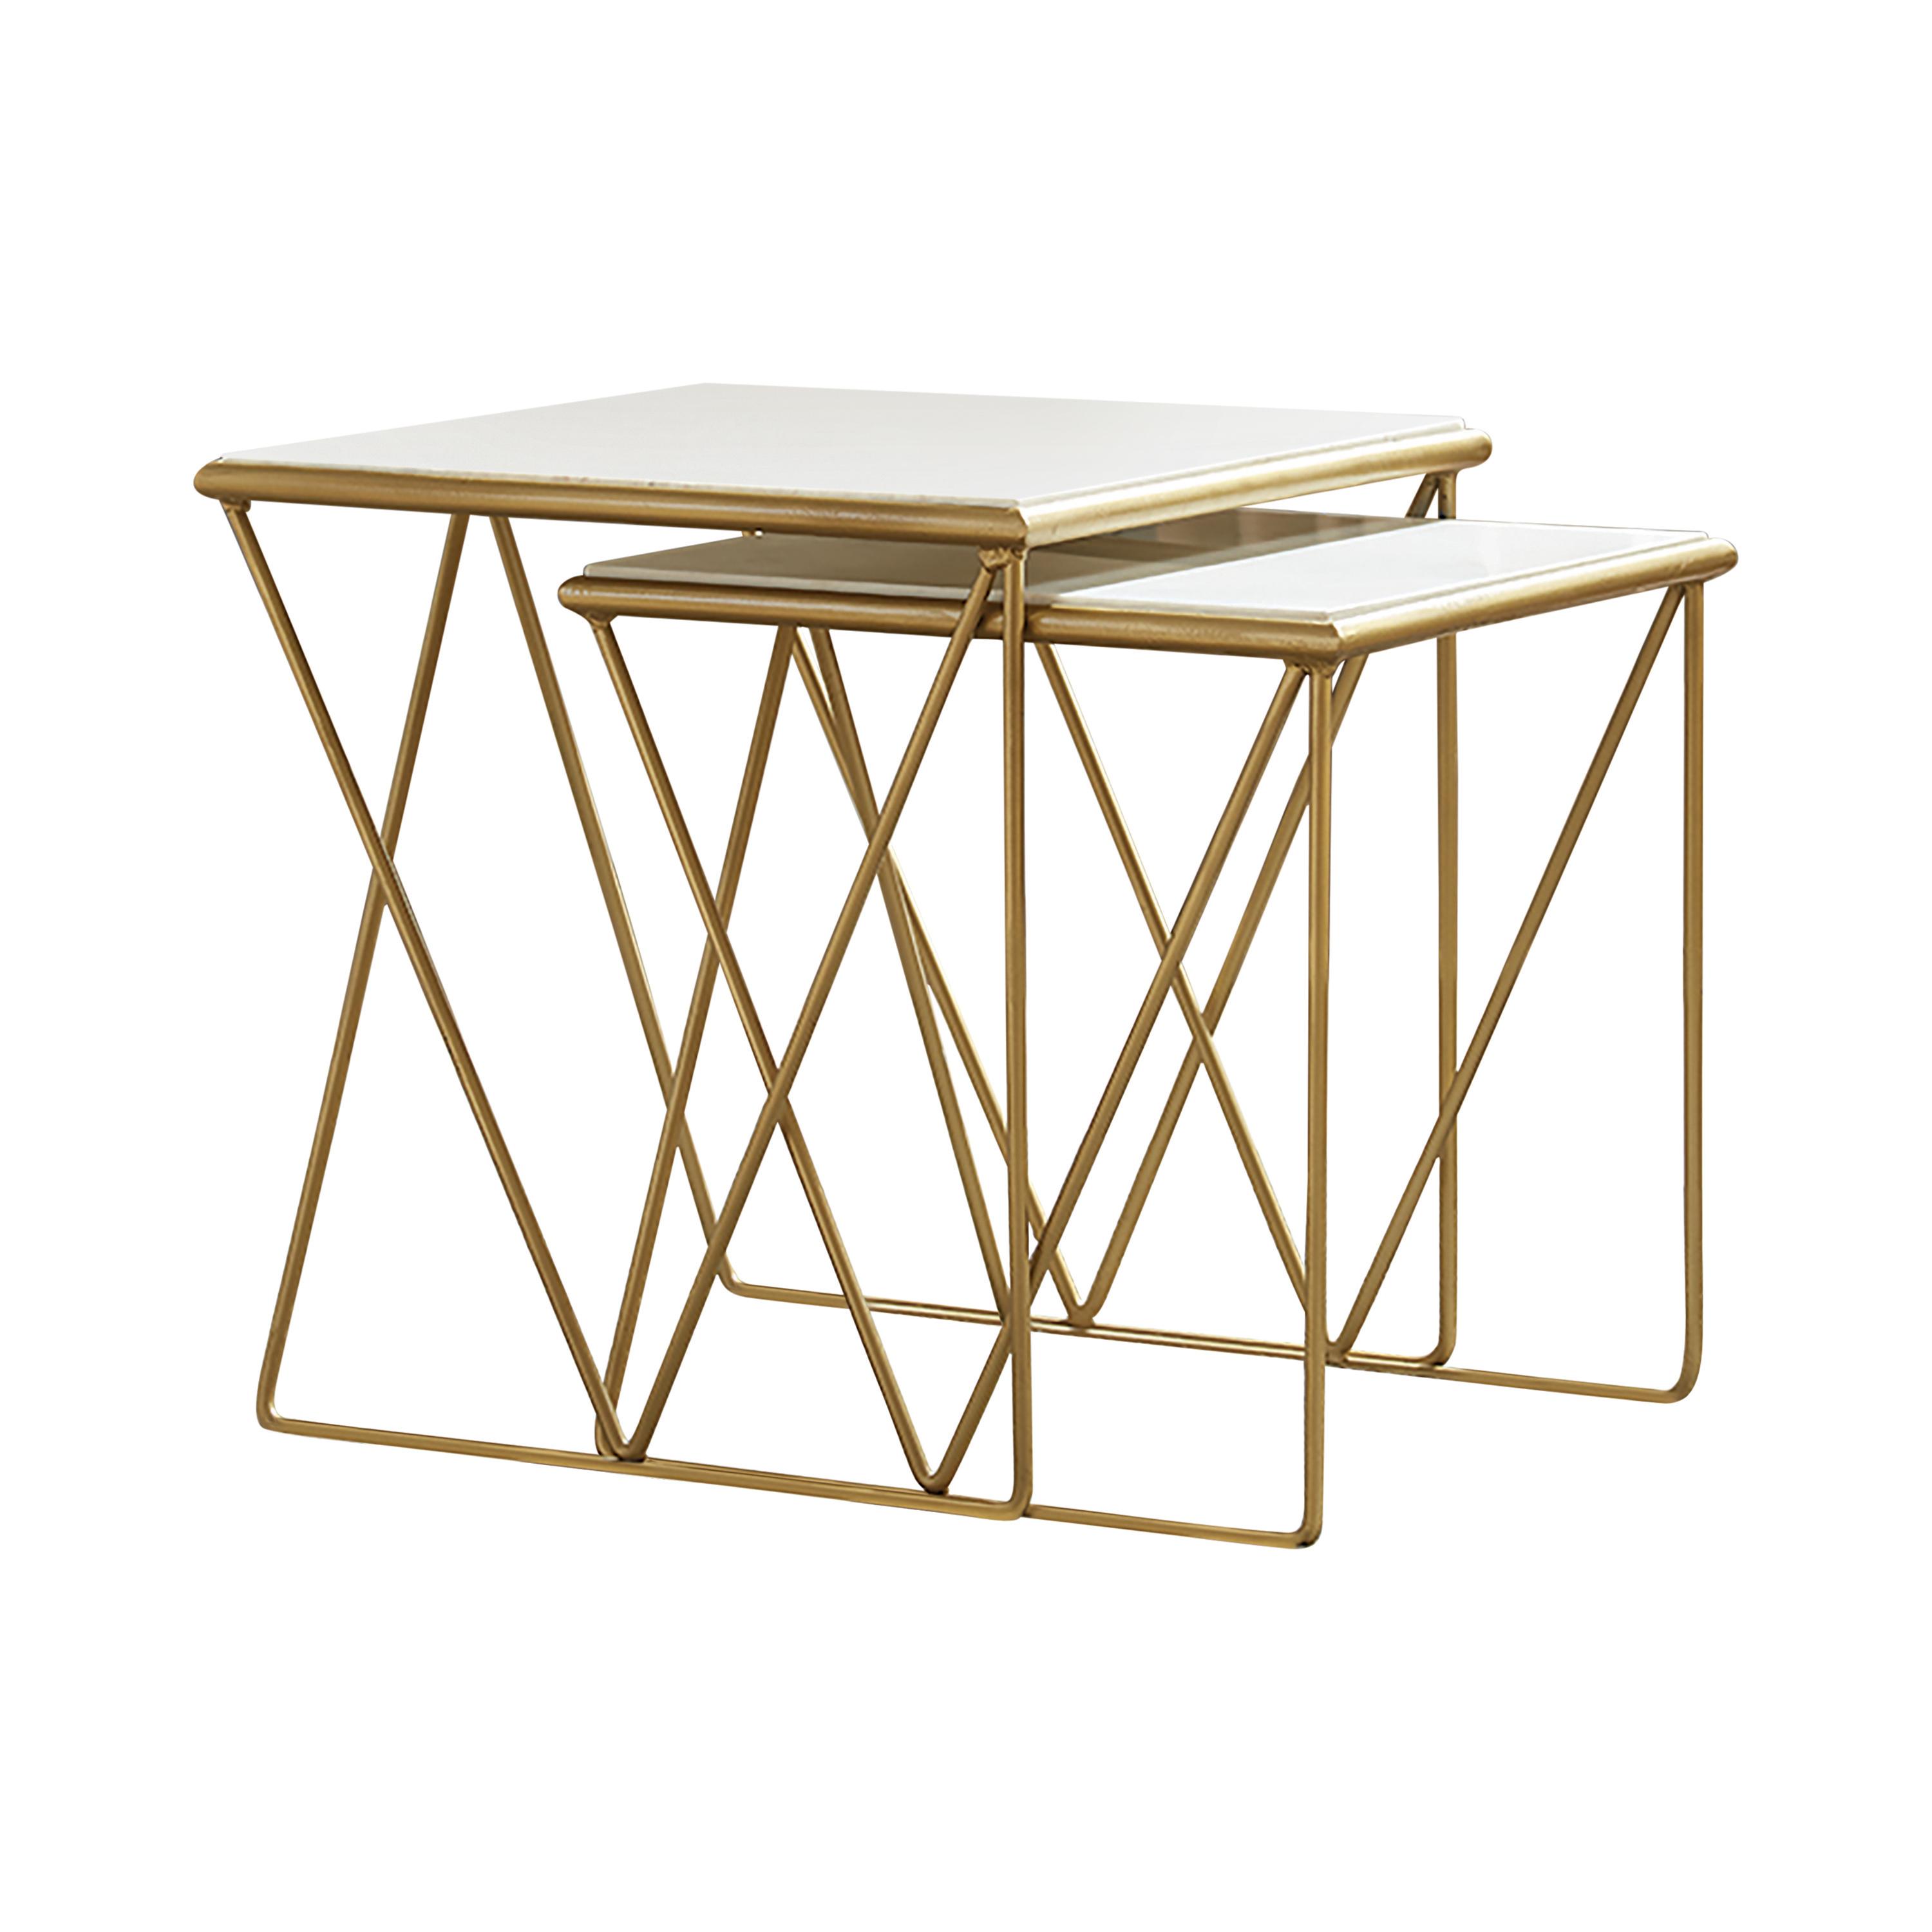 Contemporary Nesting Tables Set 930075 930075 in White, Gold 